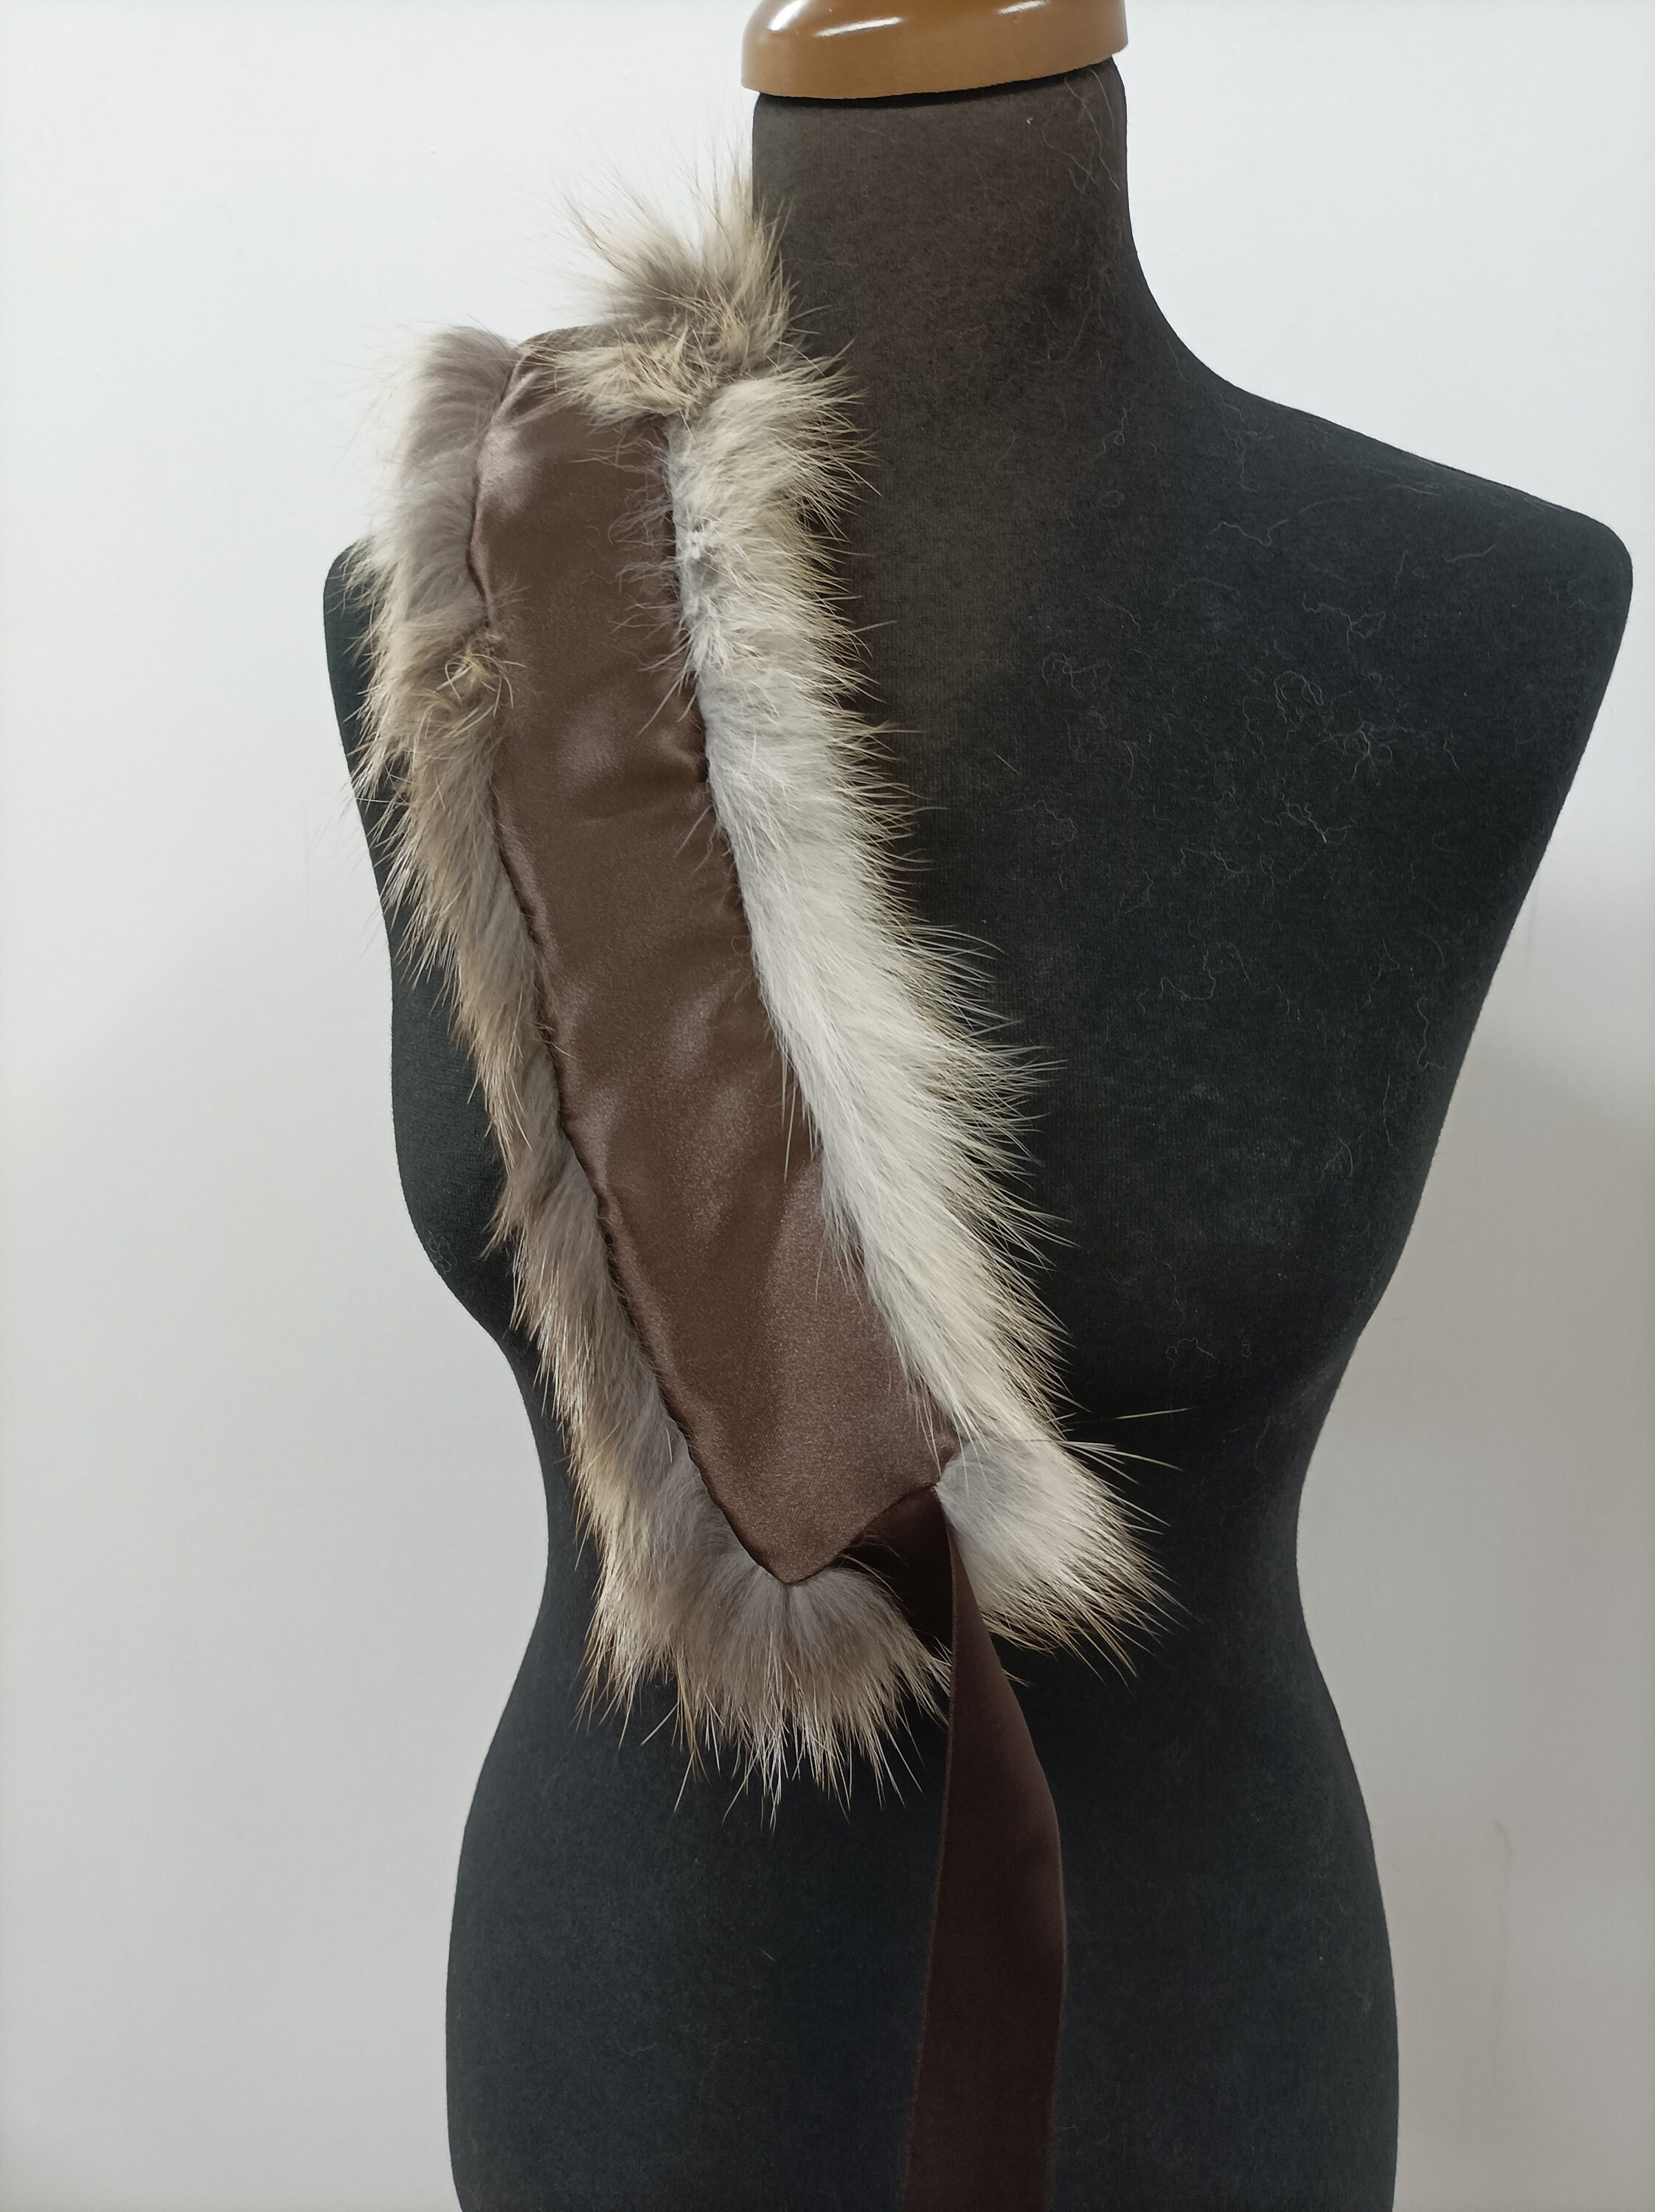 Gold Frost Fur Collar I Something different, something unique